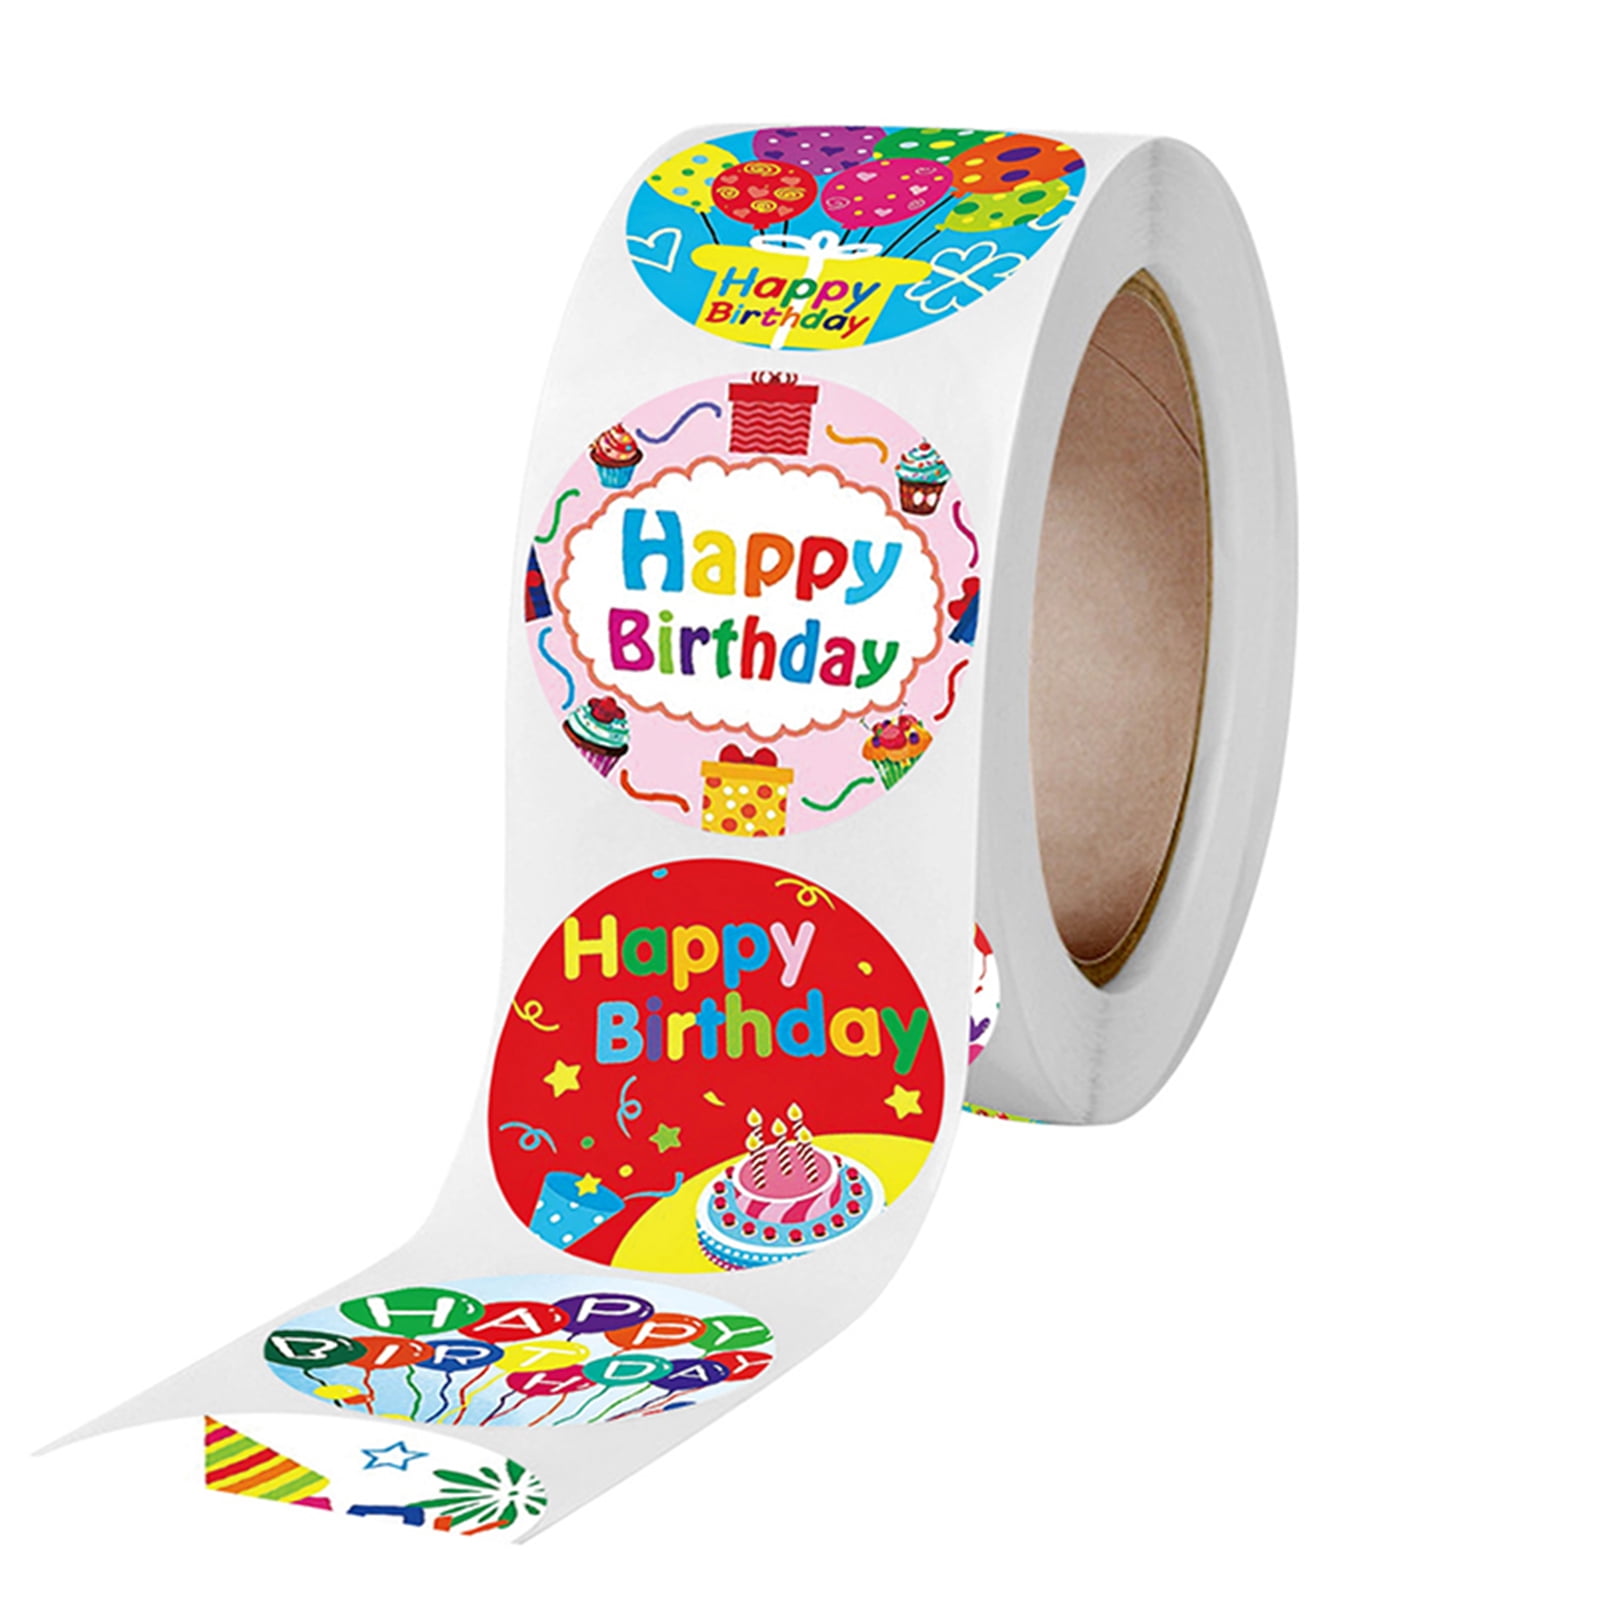 Happy Birthday Sticker Self-Adhesive Birthday Gift Sealing Stickers 1 Inch 500 Stickers per Roll with 6 Colors